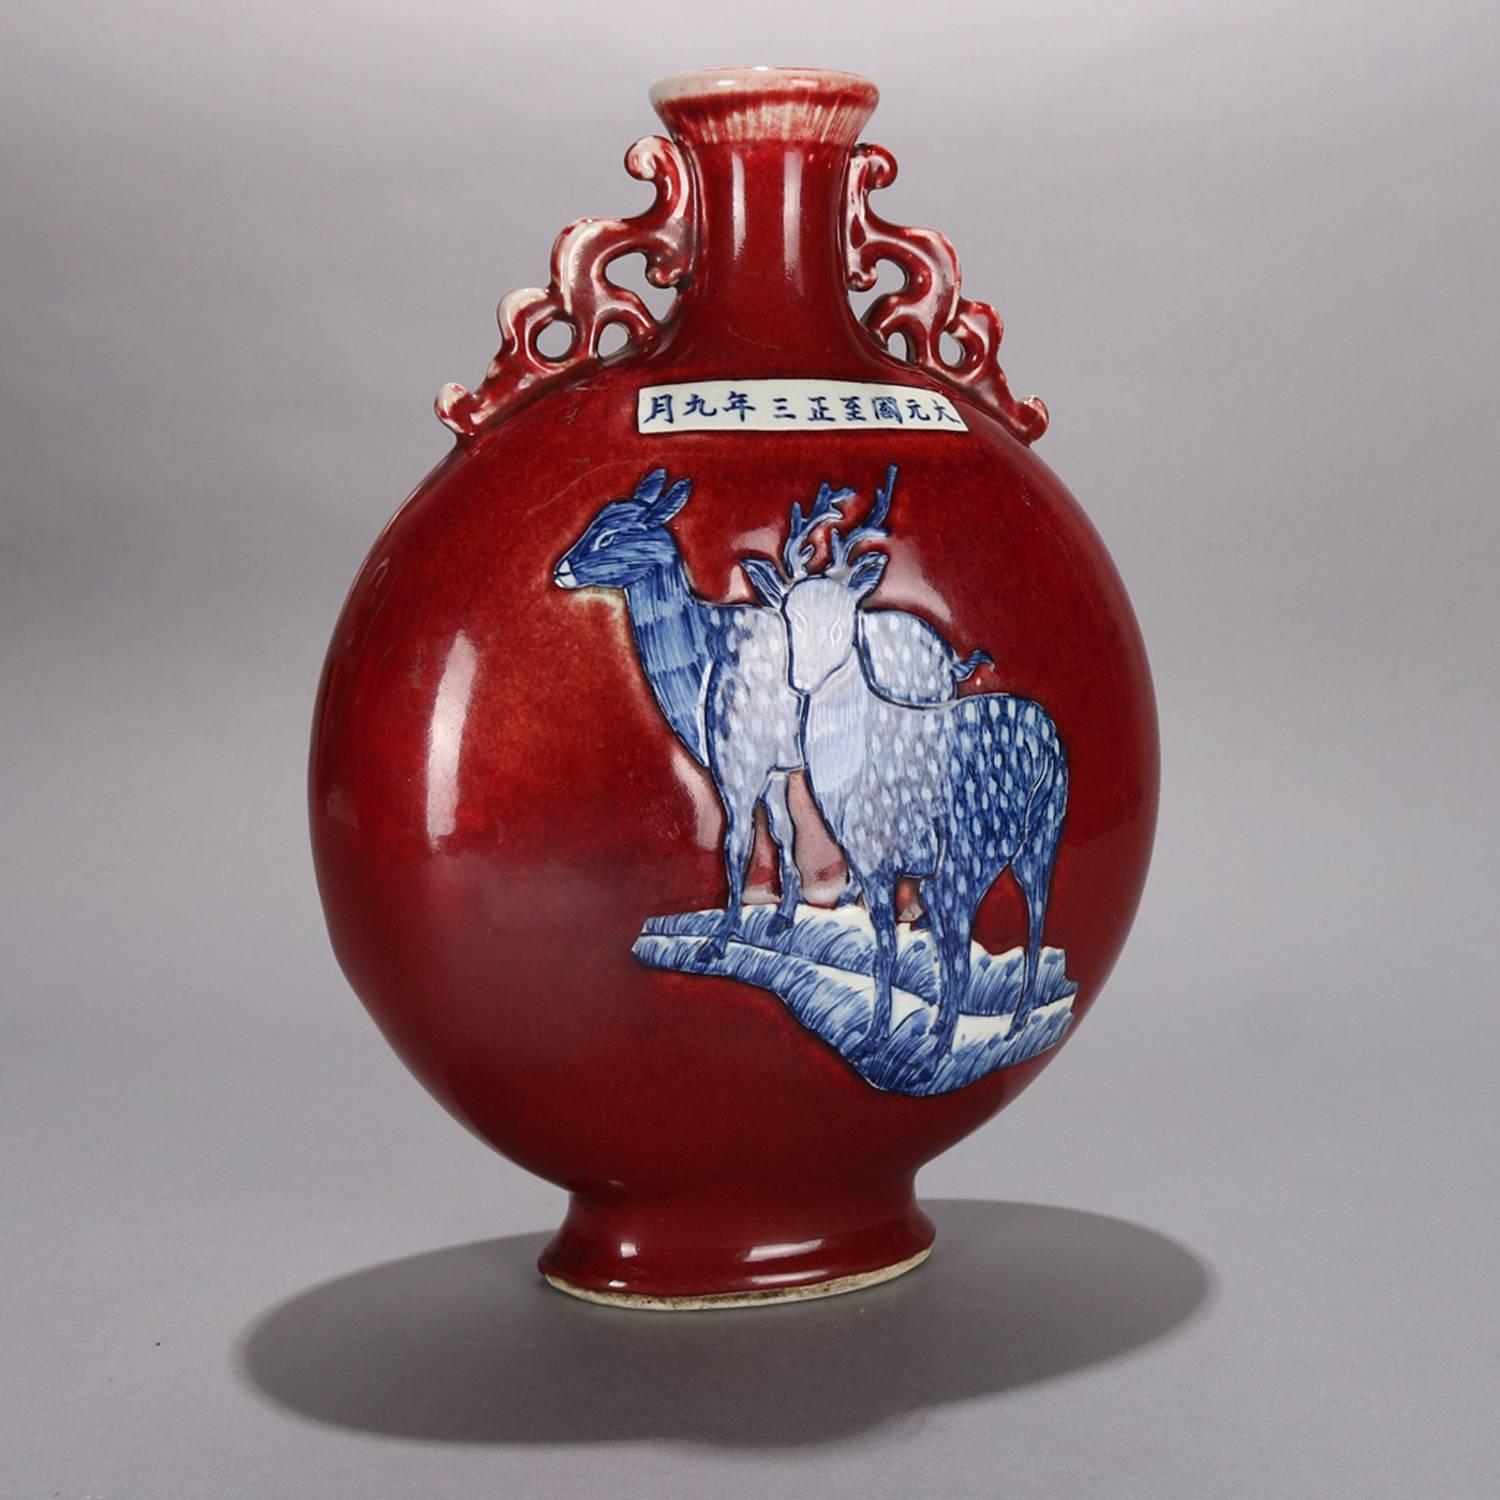 Glazed Chinese Hand-Painted Oxblood Moon Vase with Deer, Chop Mark Titled, 20th Century